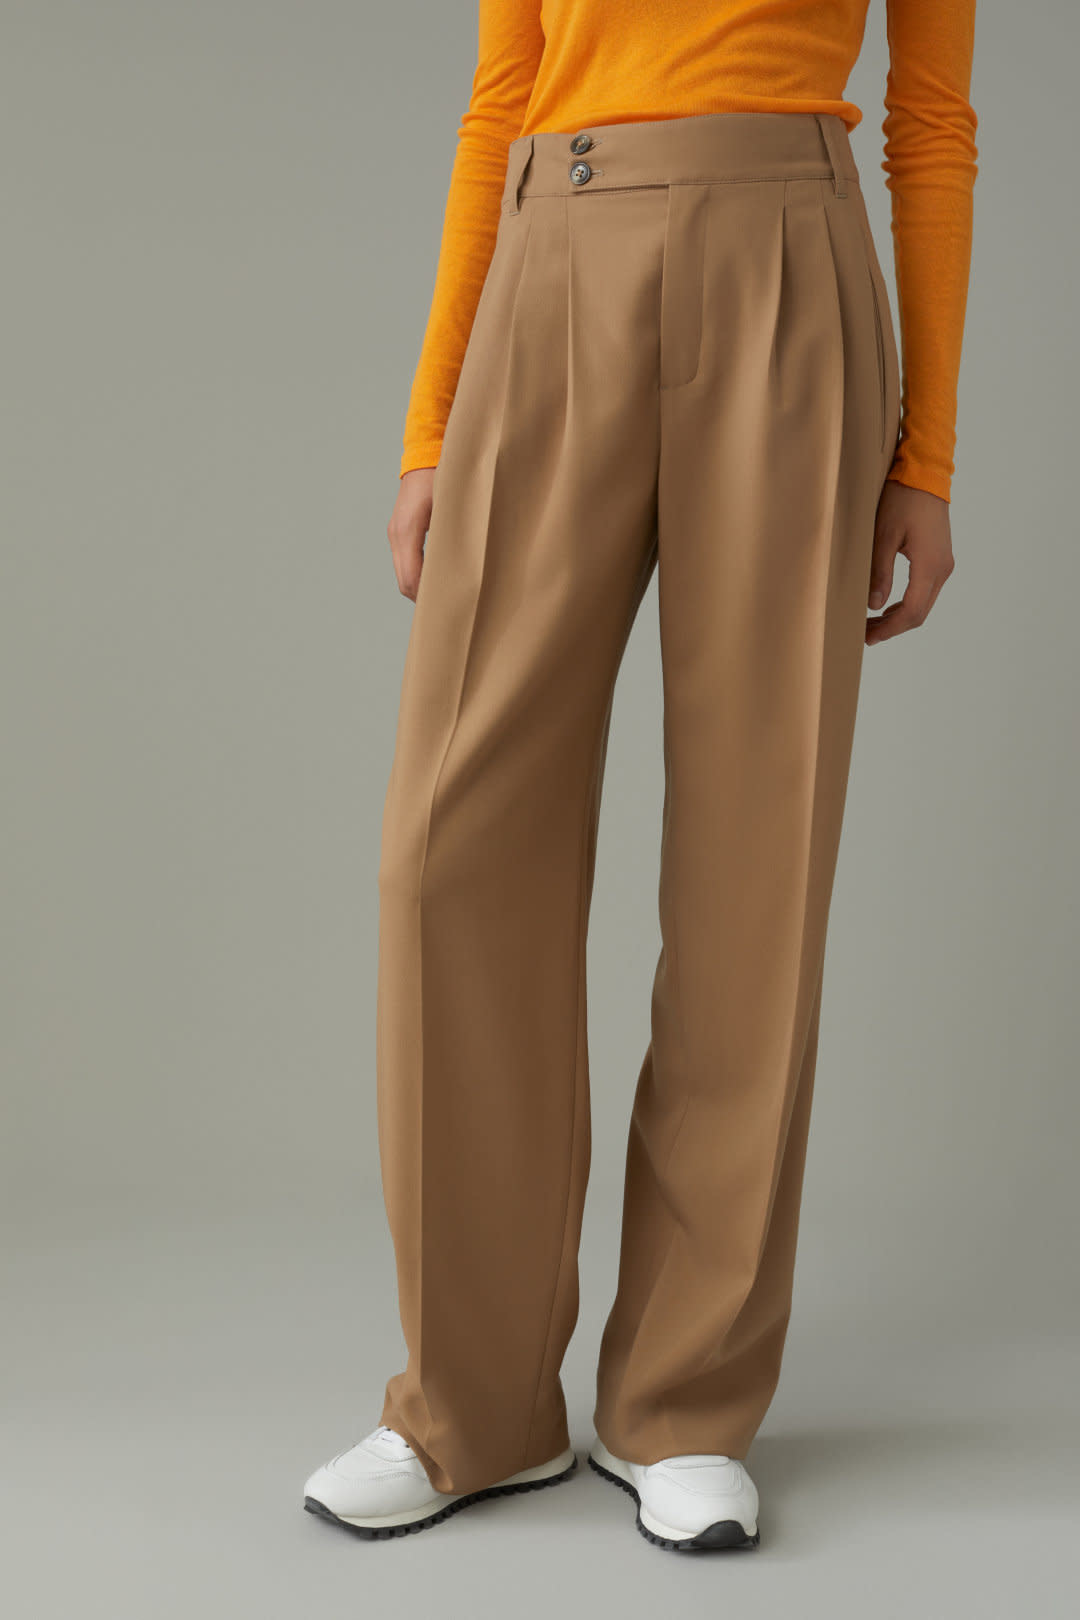 Nora Long Pant  Lost in Paradise